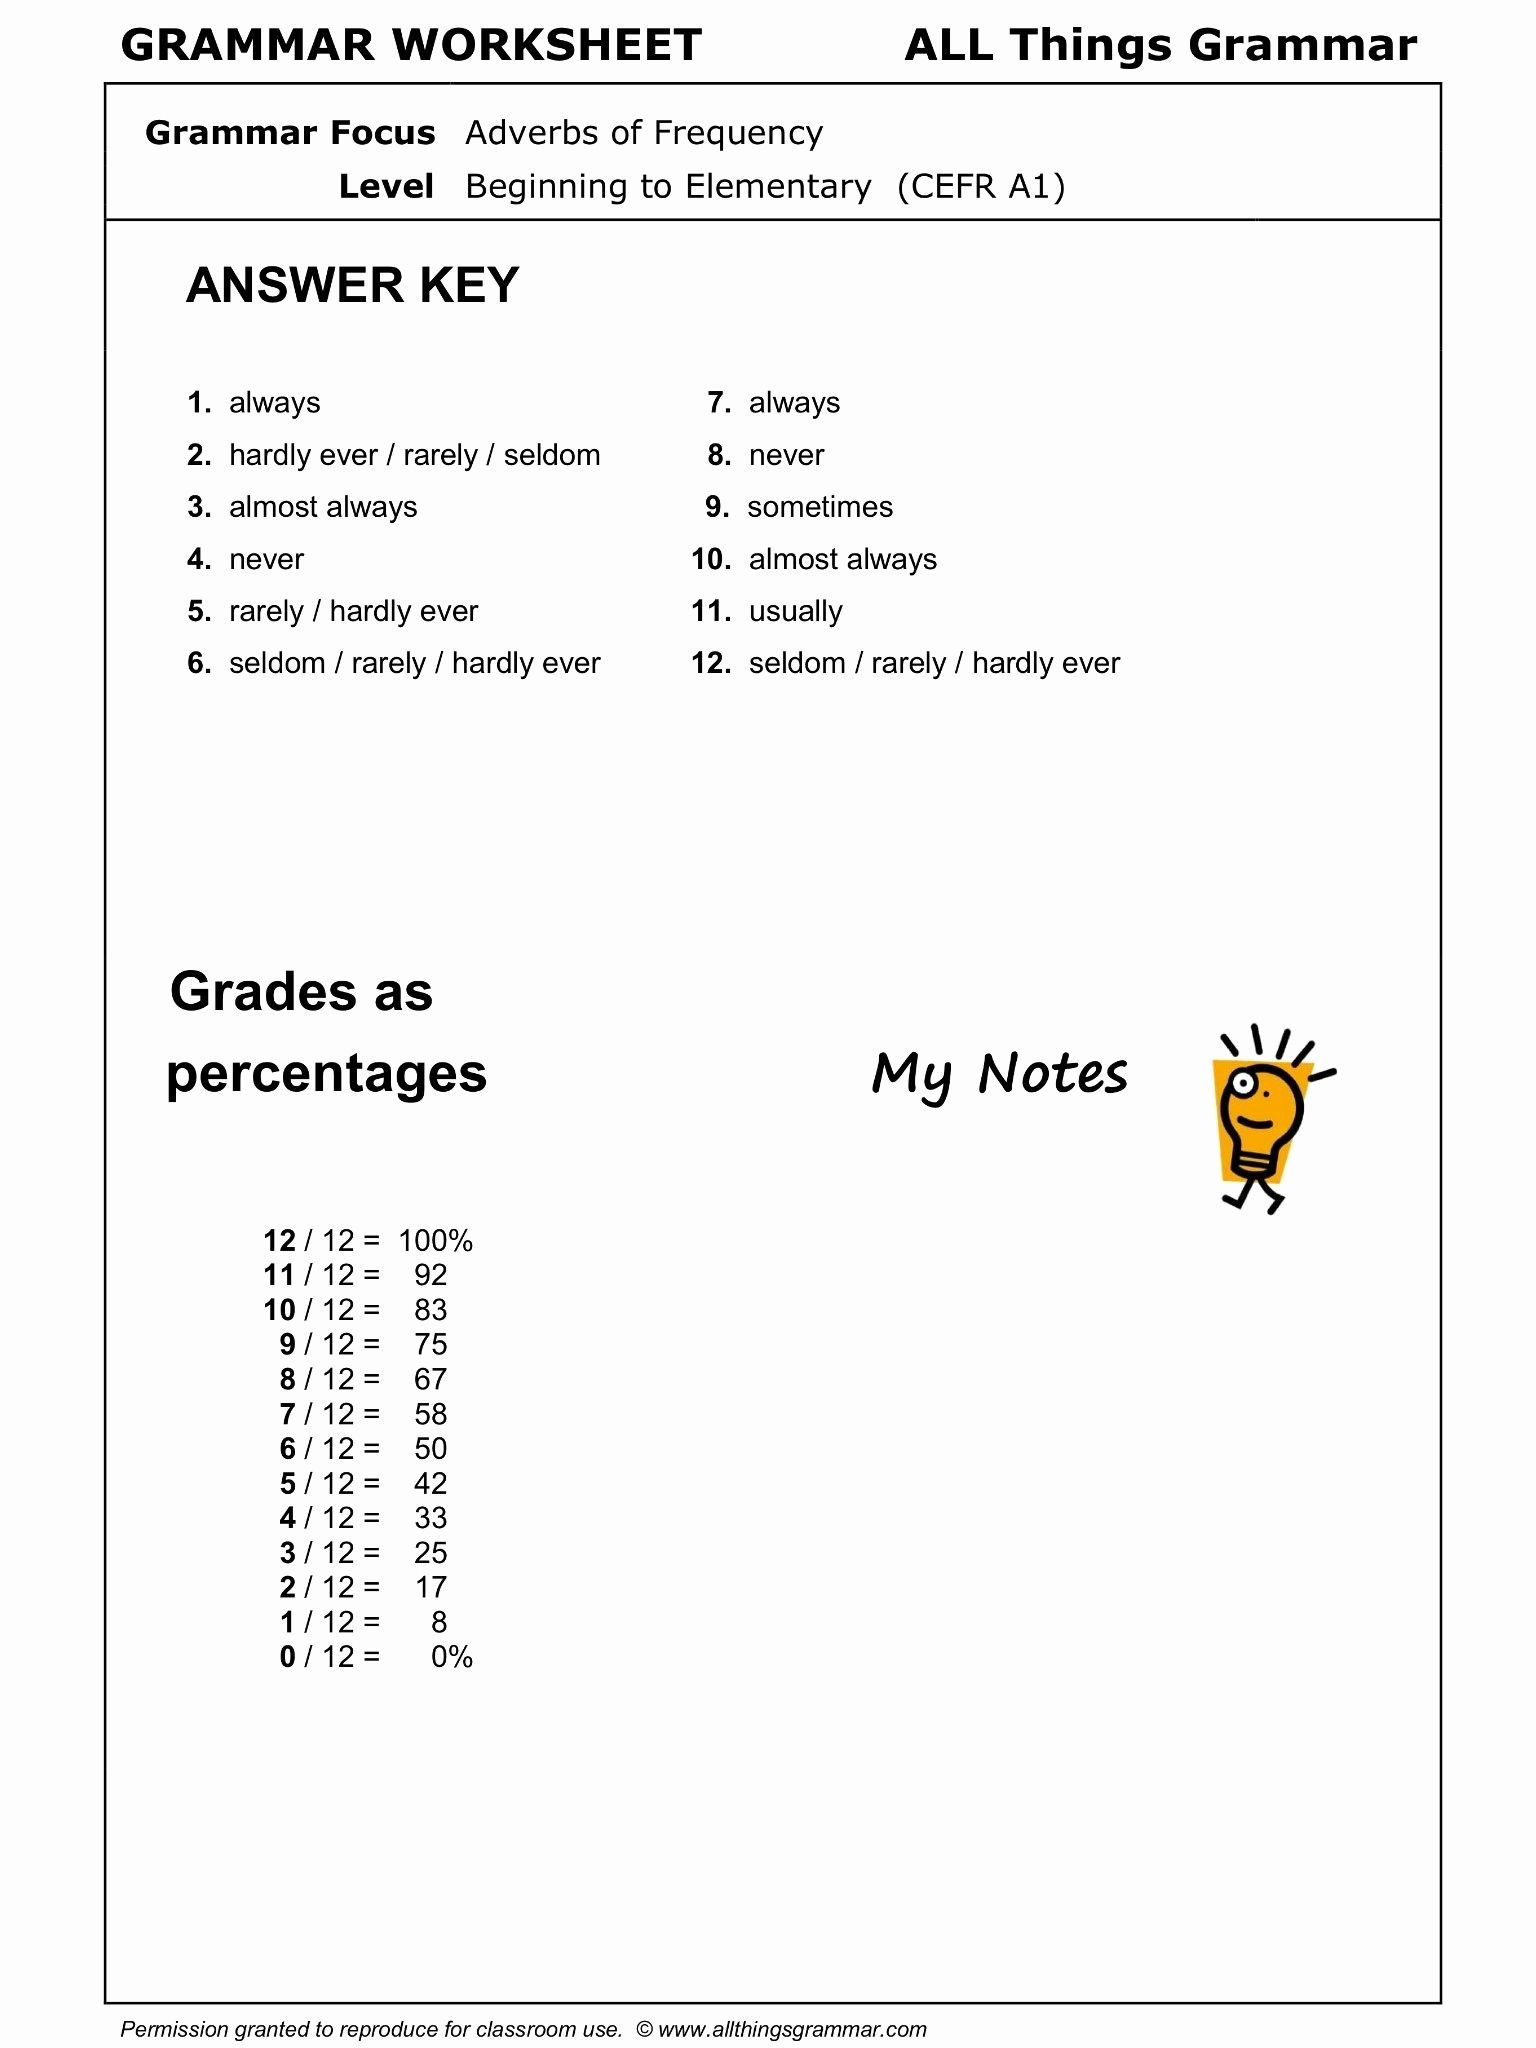 Taxation Worksheet Answers Db excel